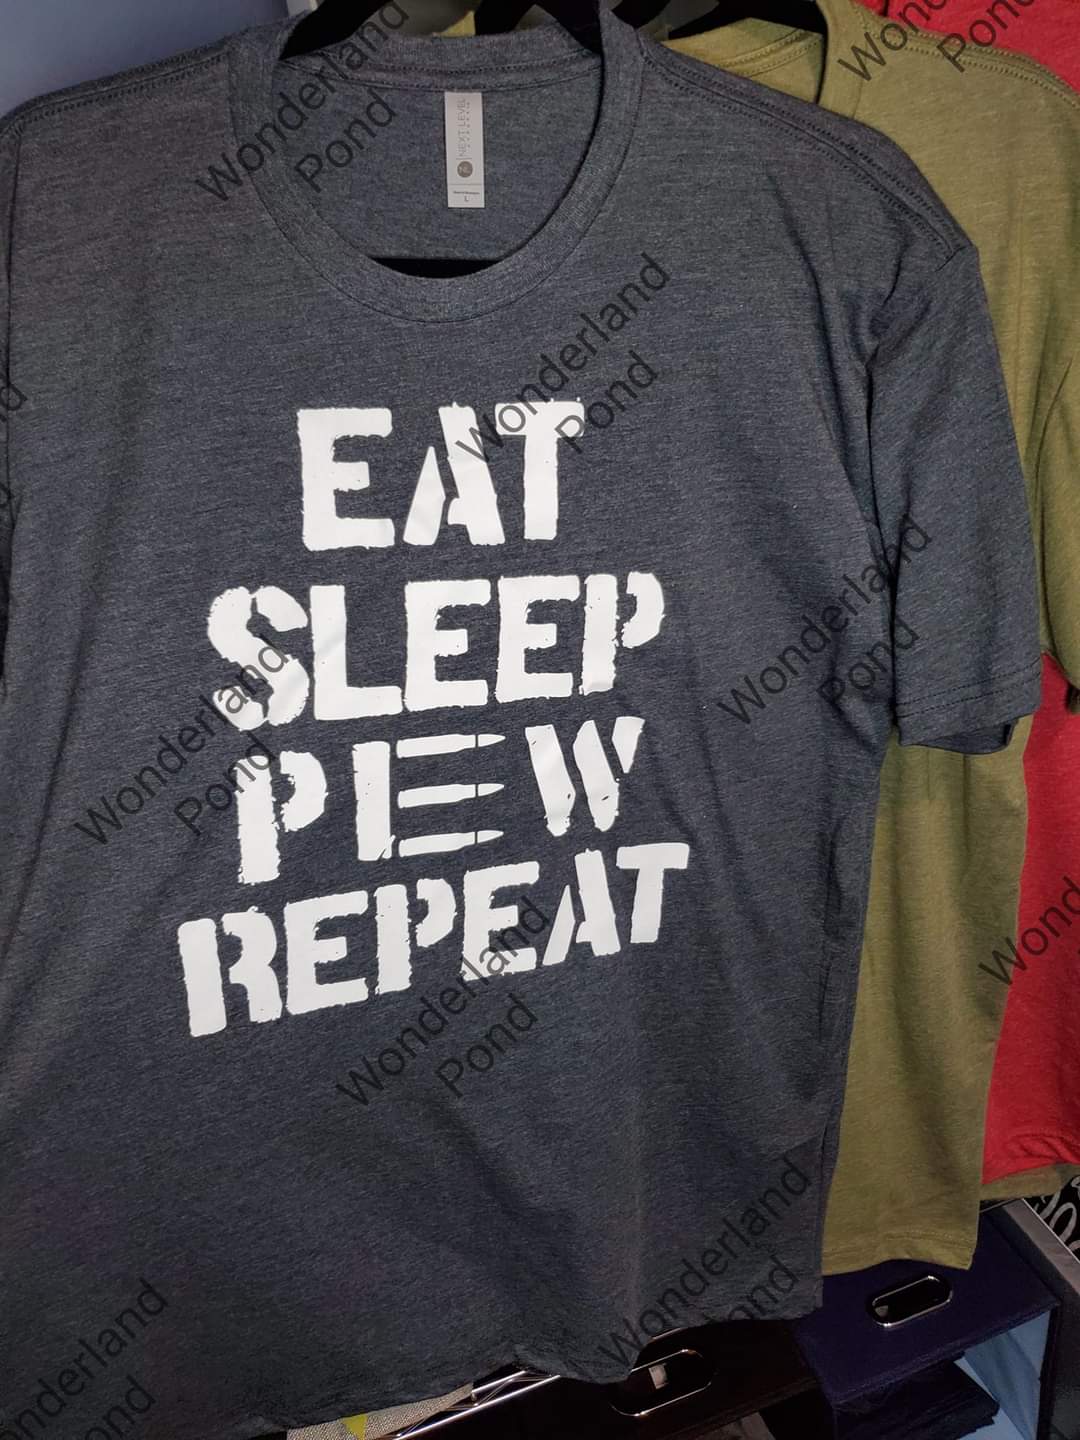 Eat Sleep Pew Repeat (Limited Edition)